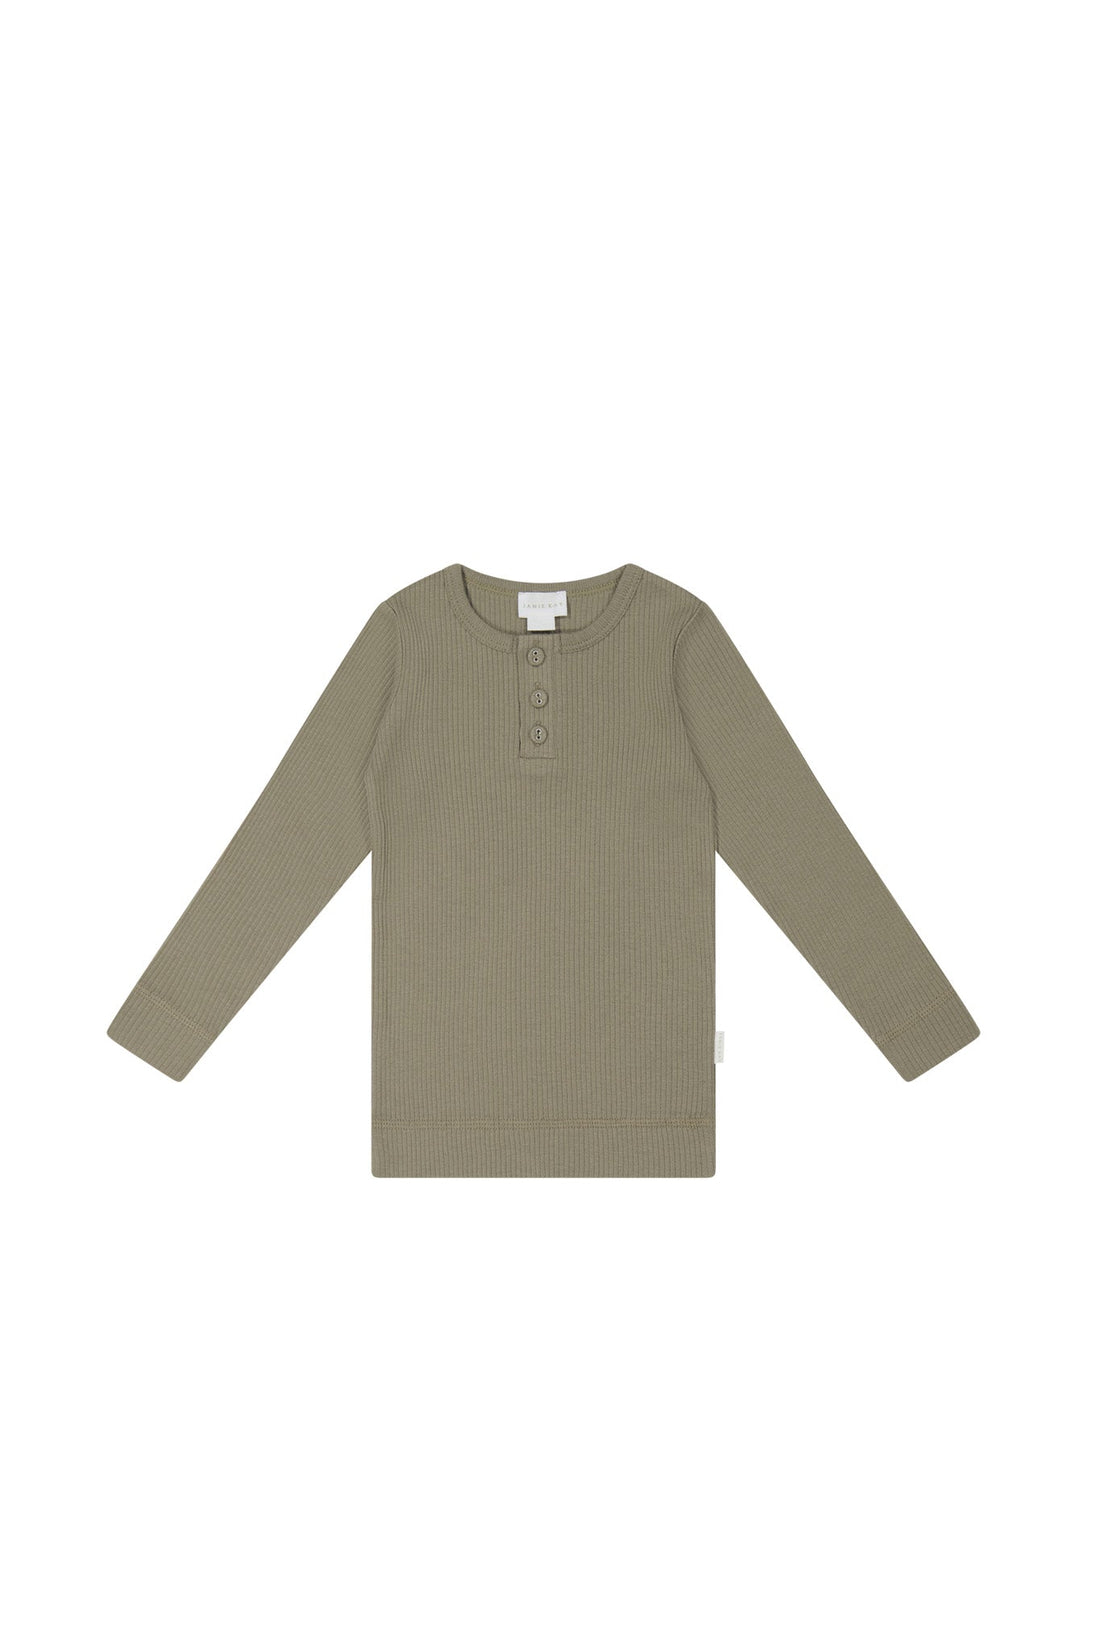 Organic Cotton Modal Long Sleeve Henley - Sepia Childrens Top from Jamie Kay USA